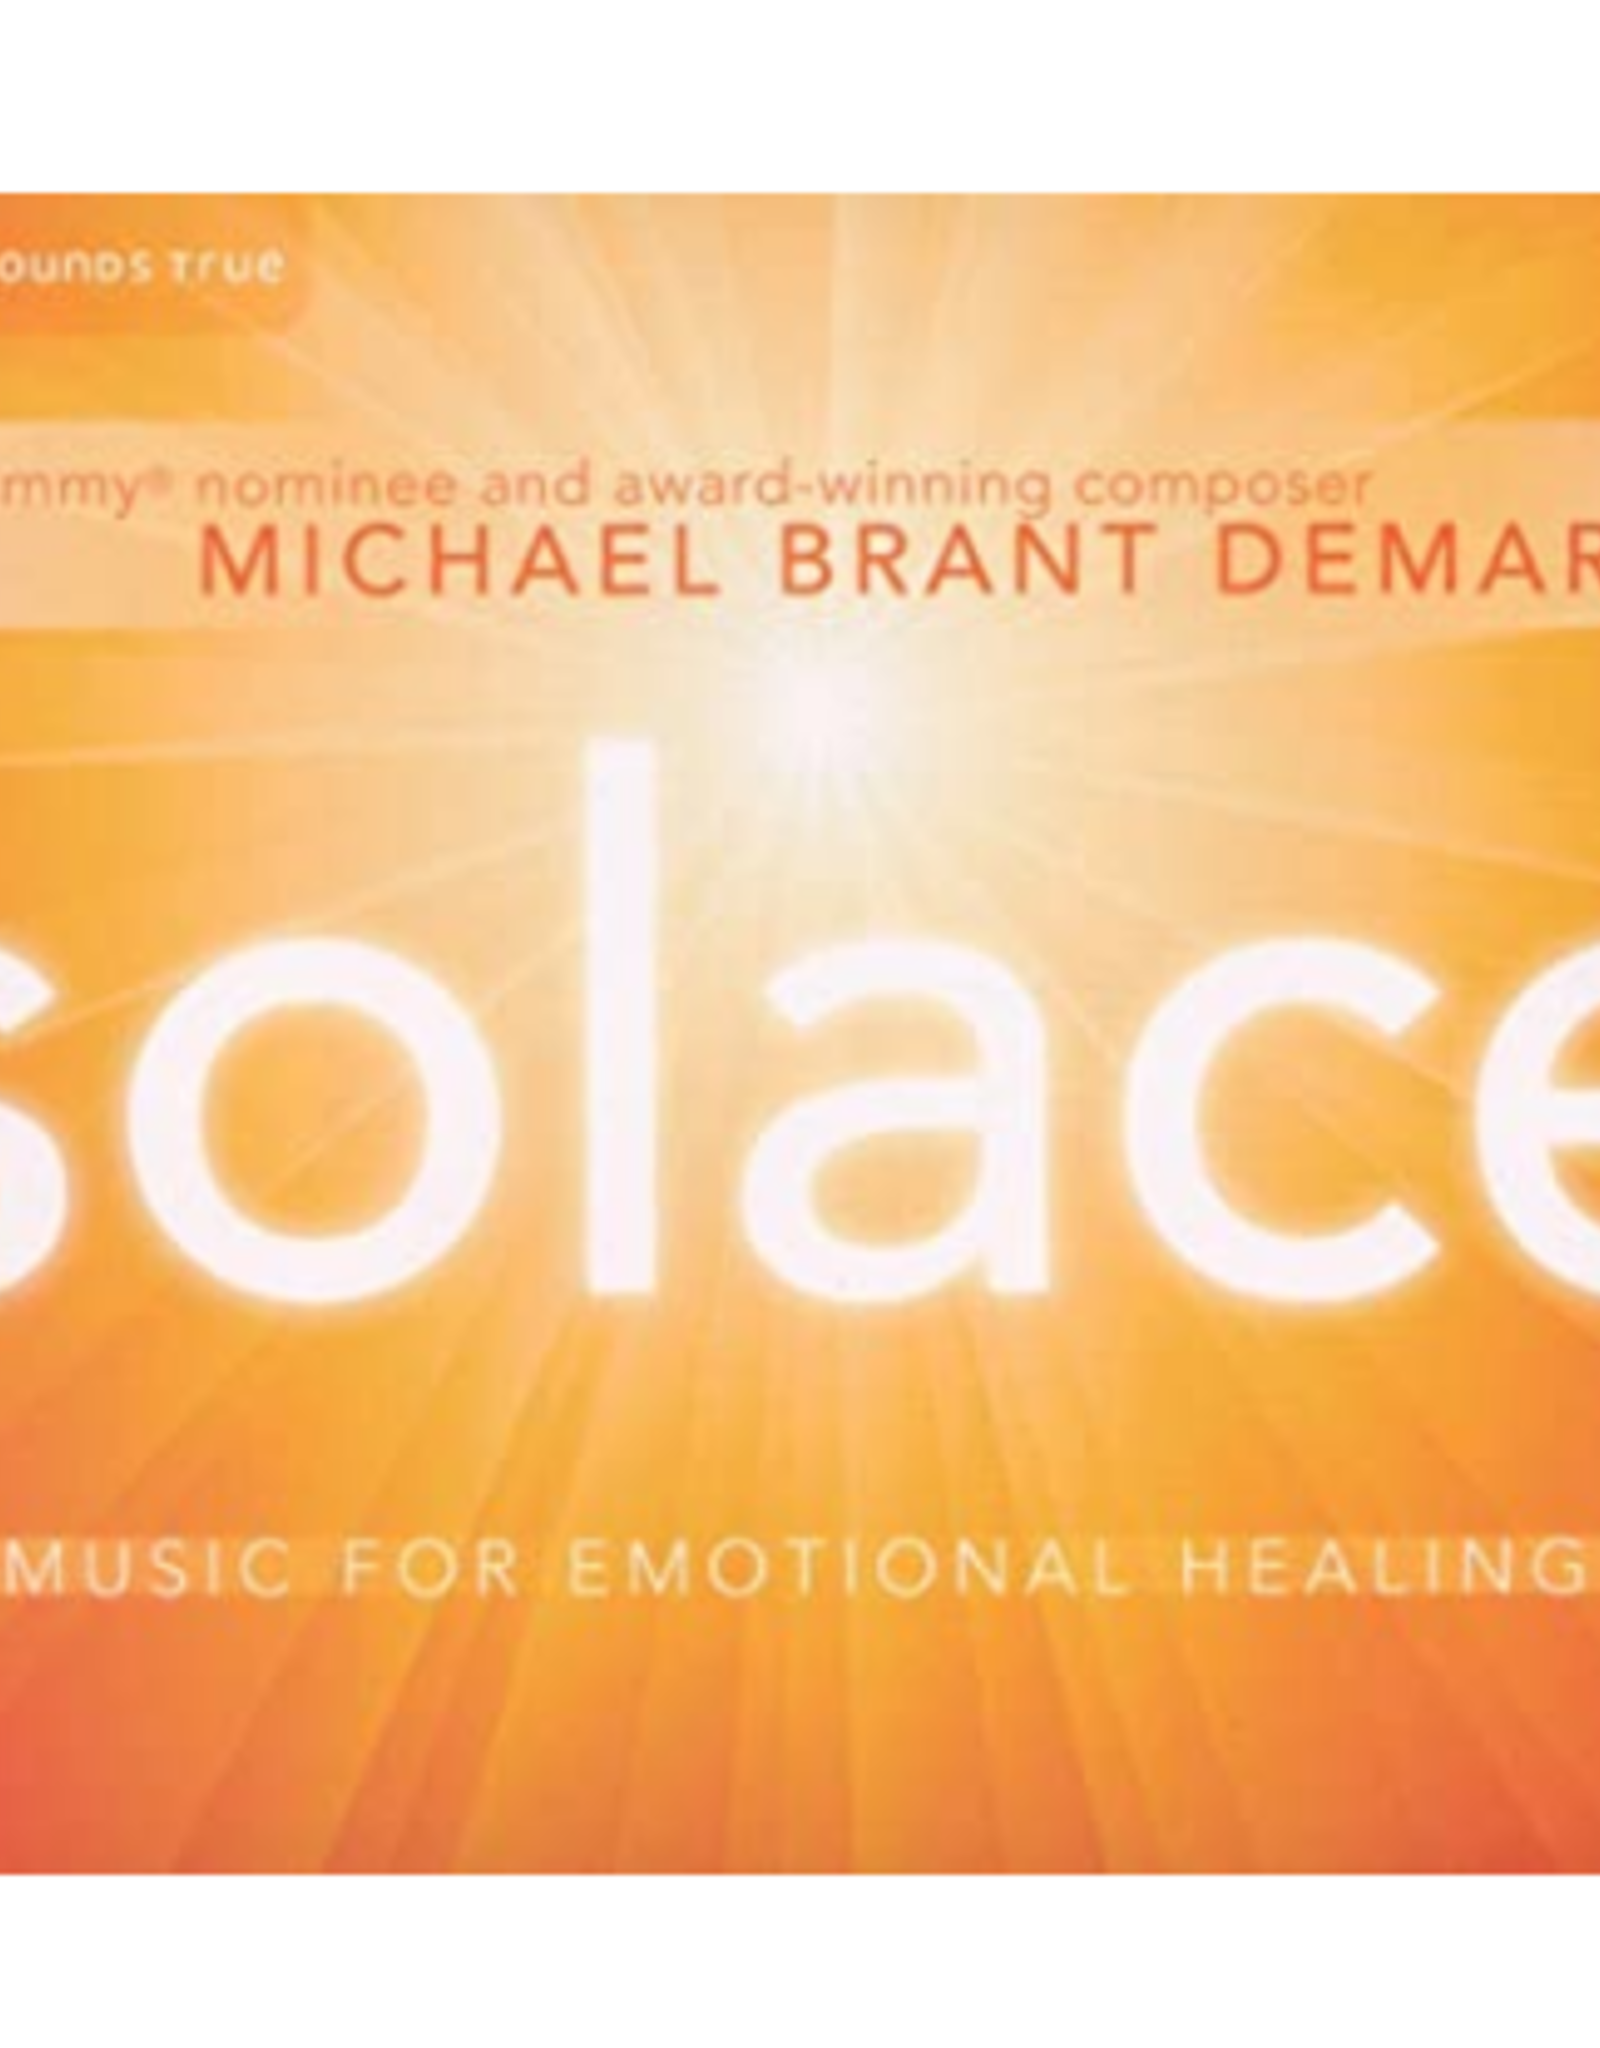 Michael Brant Demaria Solace CD by Michael Brant Demaria